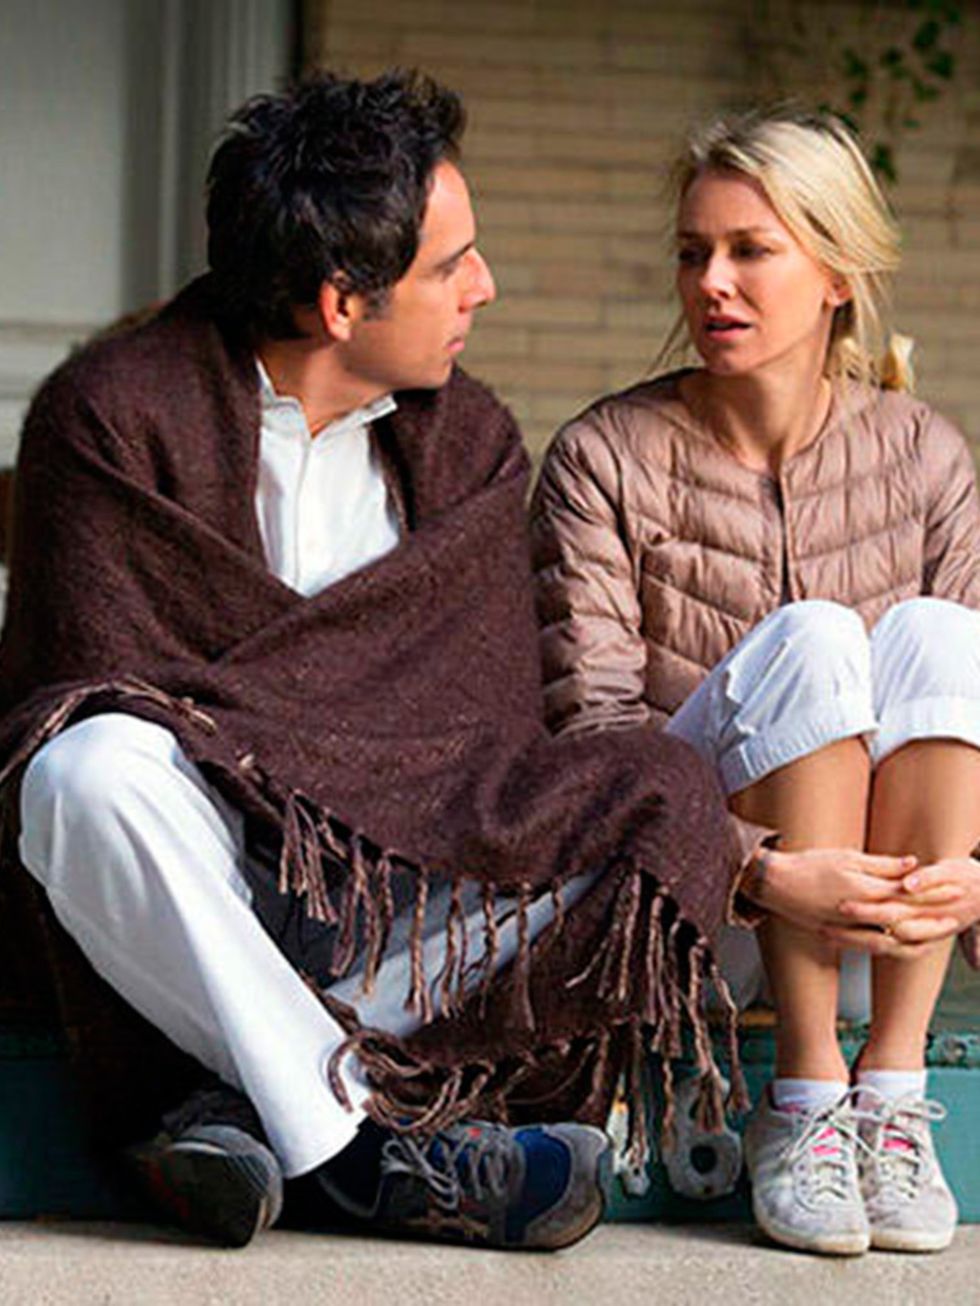 <p><strong>FILM: While Were Young </strong></p>

<p>Noah Baumbachs latest stars Ben Stiller and Naomi Watts, playing married forty-somethings stuck in an midlife crisis and entranced by the bohemian lifestyle of younger couple Jamie and Darby. Judging f